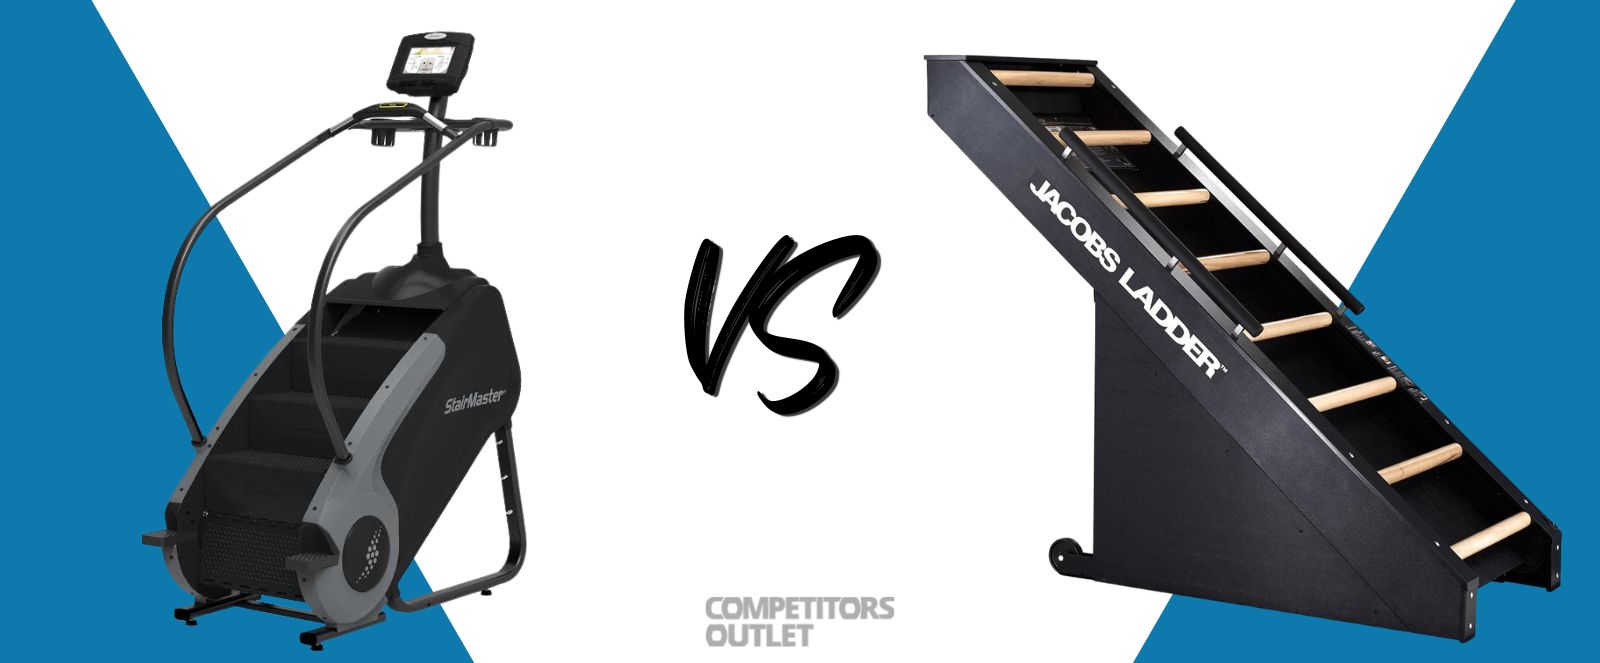 The Stairmaster vs the Jacobs Ladder